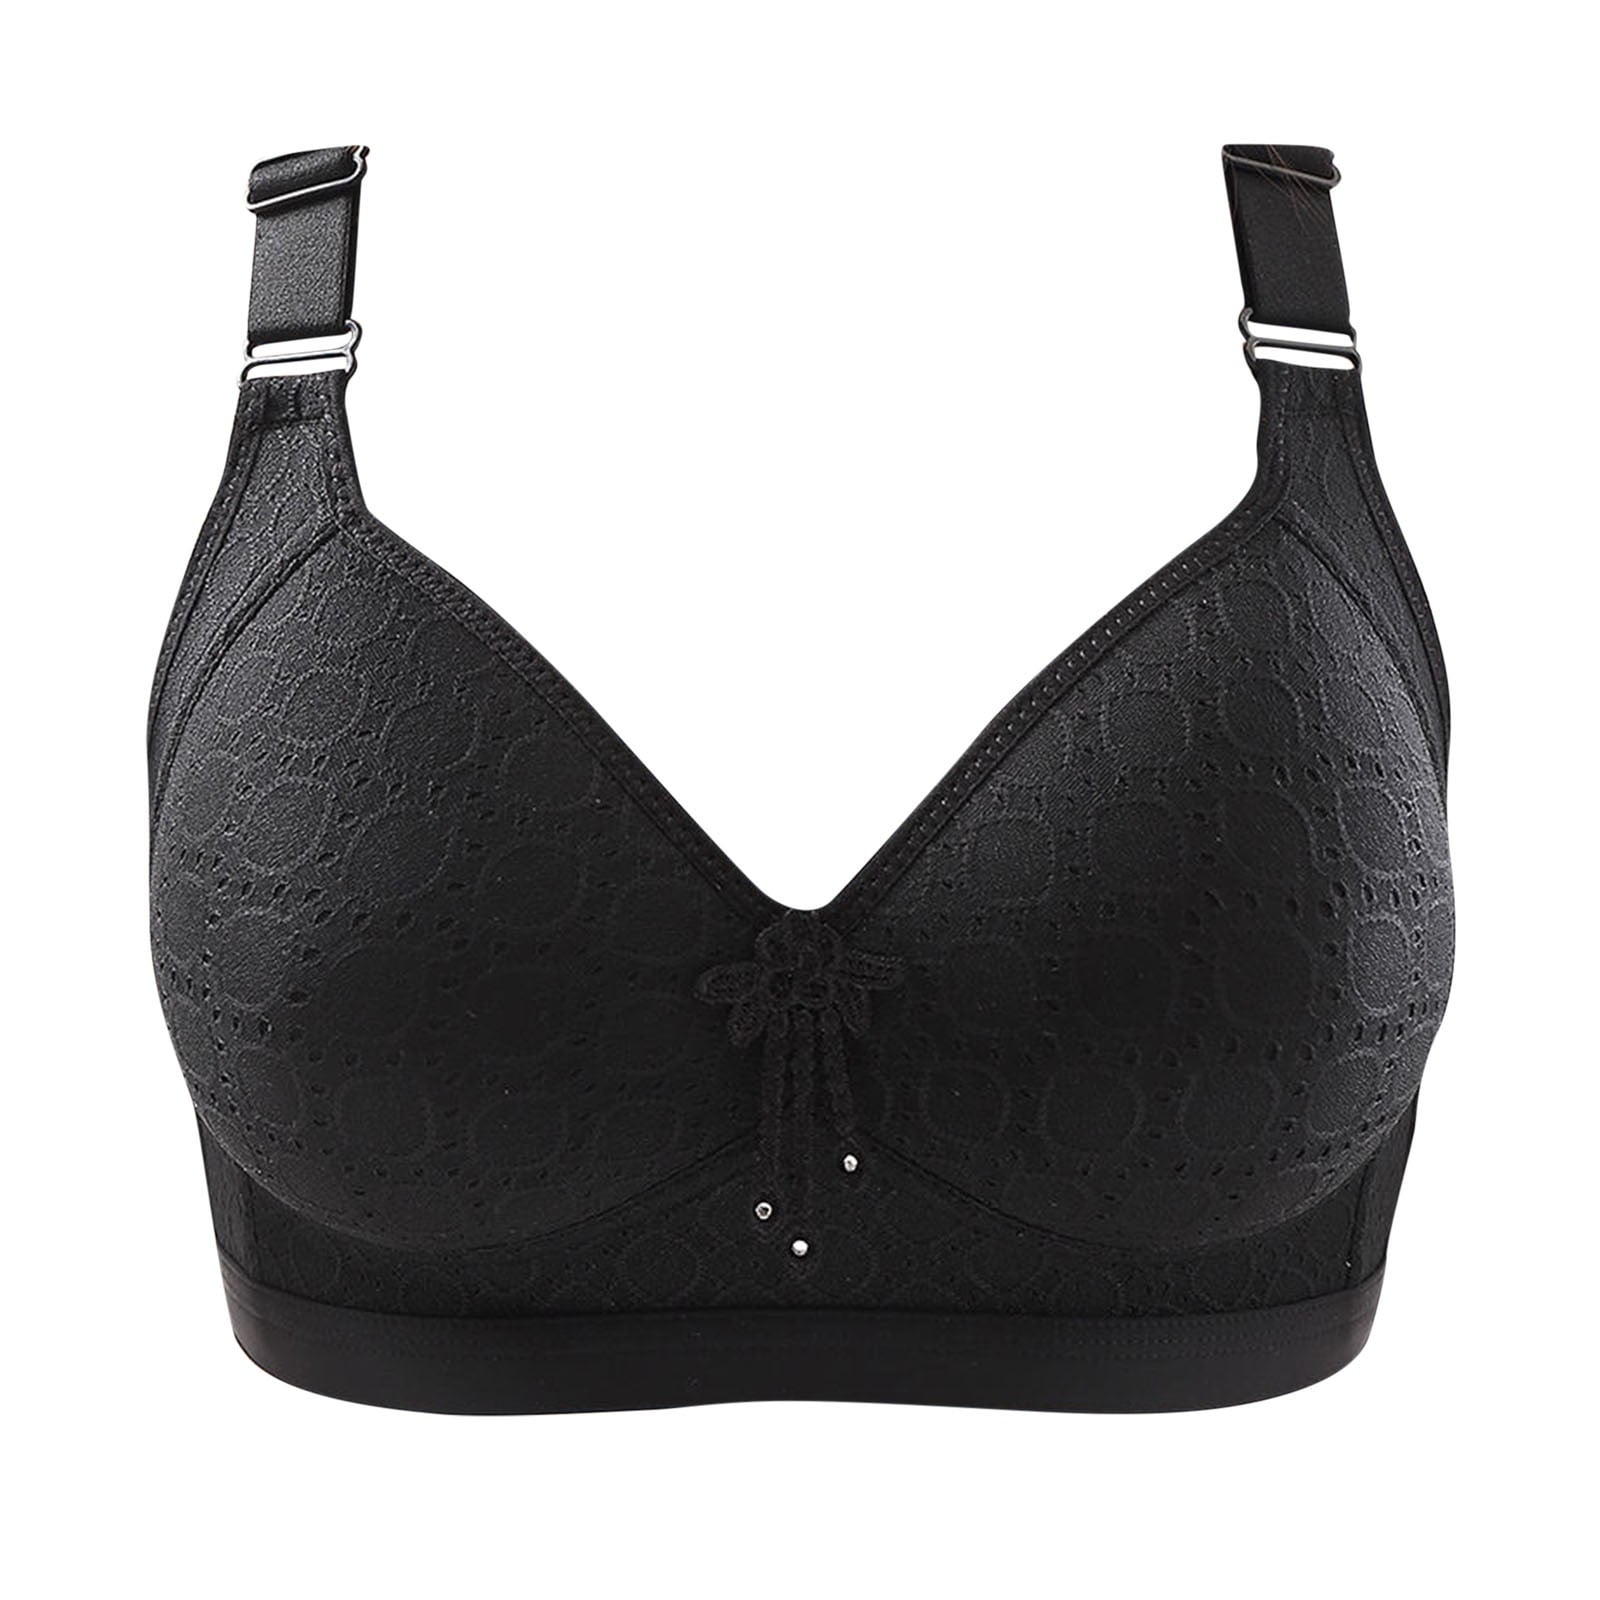 Buy Clovia Cotton Rich Solid Non-Padded Full Cup Wire Free Strapless Bra -  Black online